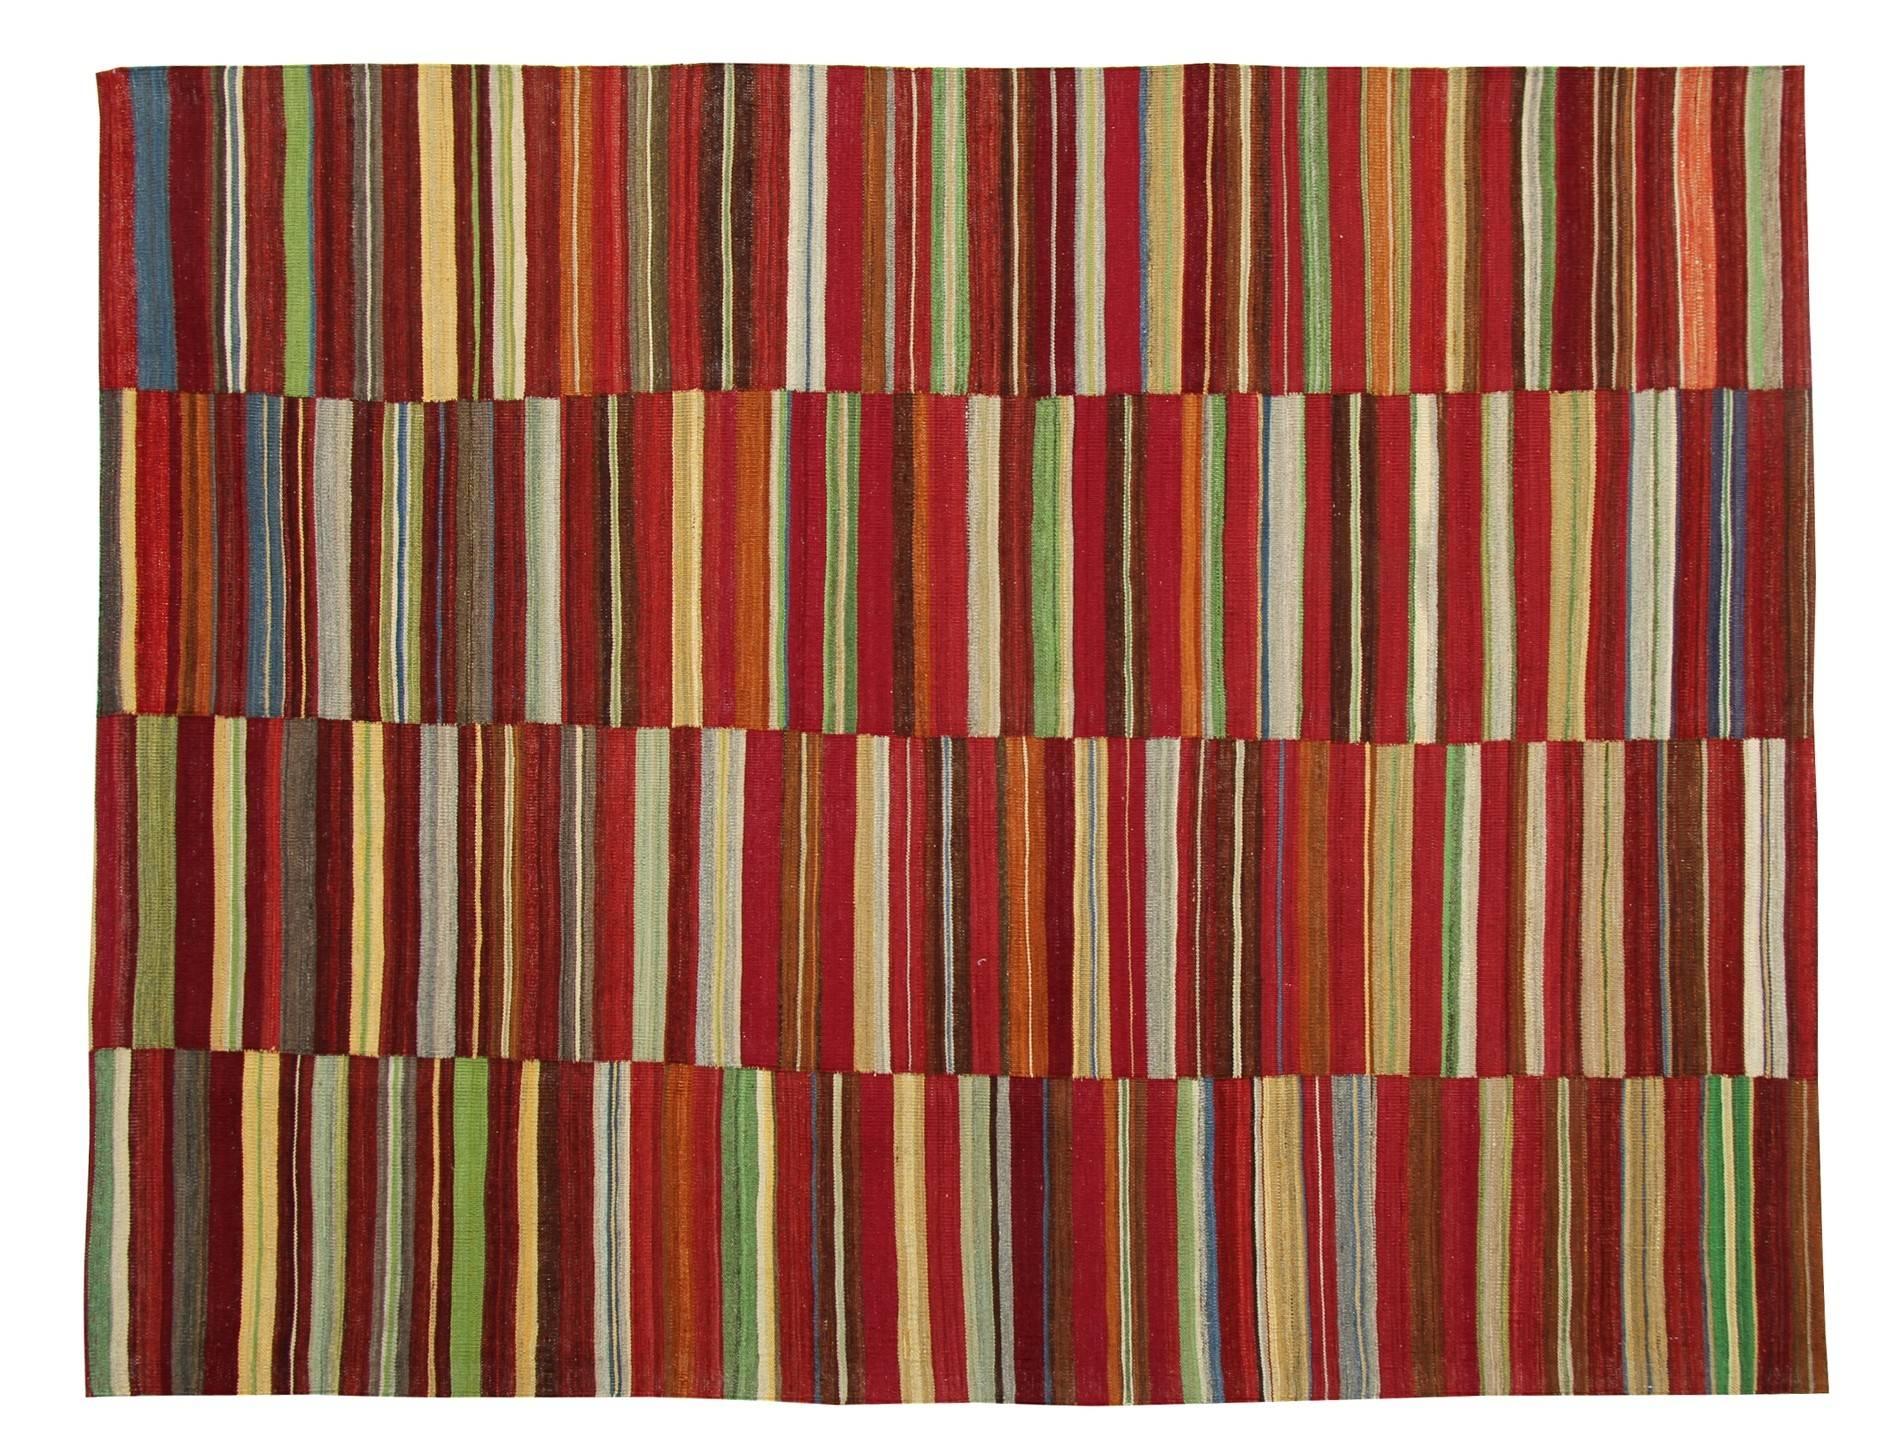 The red rug is bold and joyful, a striped rug makes a statement in any room. The tribal rug is very colourful yet organised, the stripes are symmetrical and in similar size and the clever alternance of colors makes it extremely appealing. The